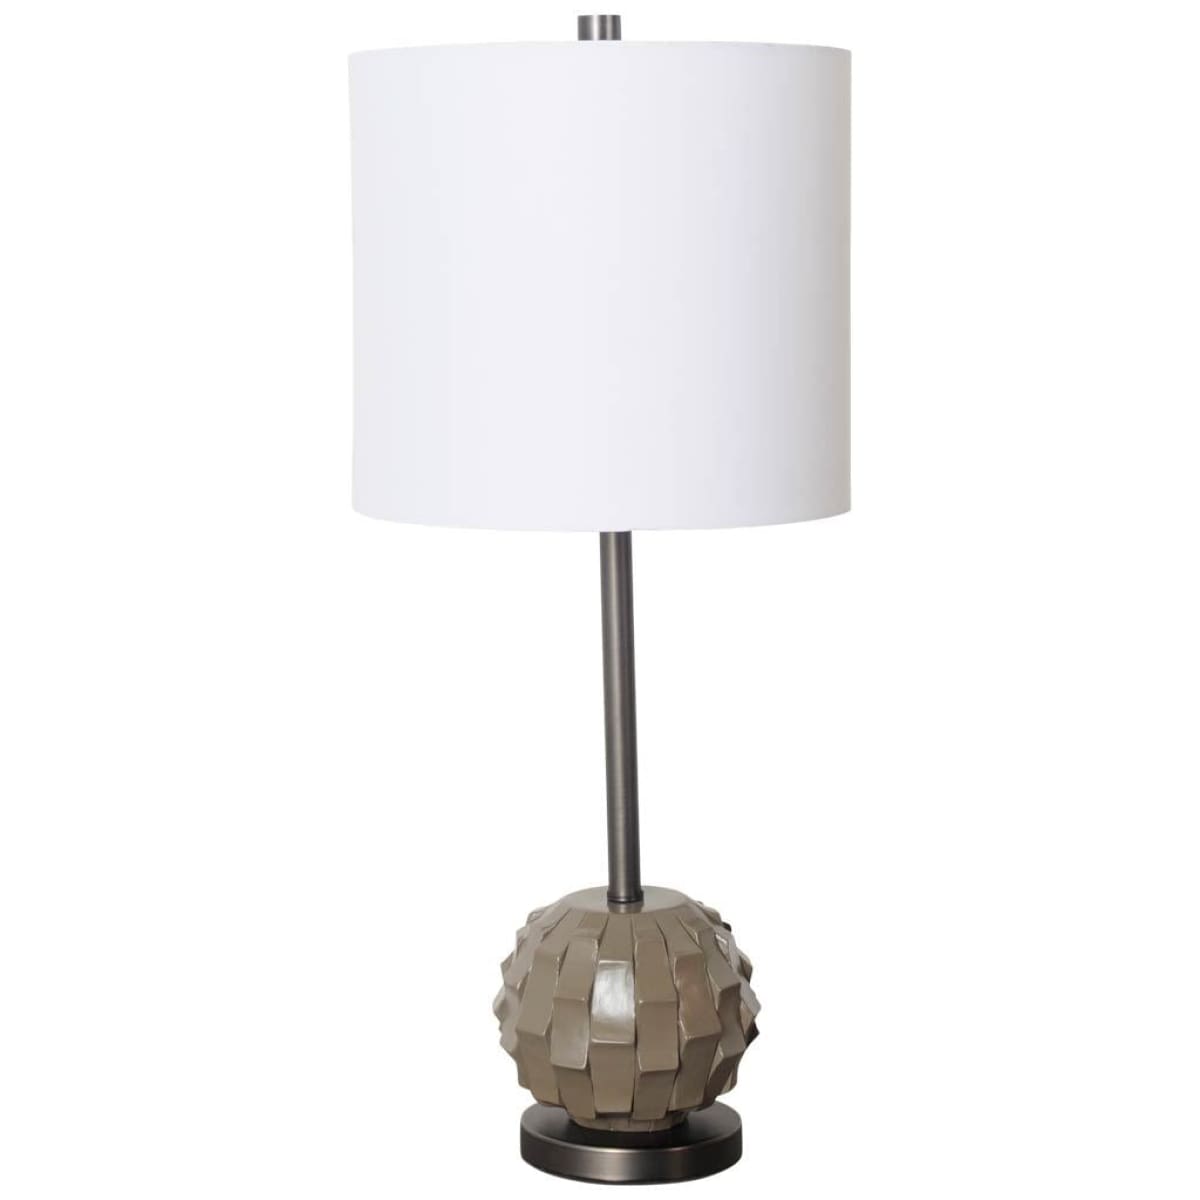 Brant Table Lamp Brown Resin | White Shade - table-lamps